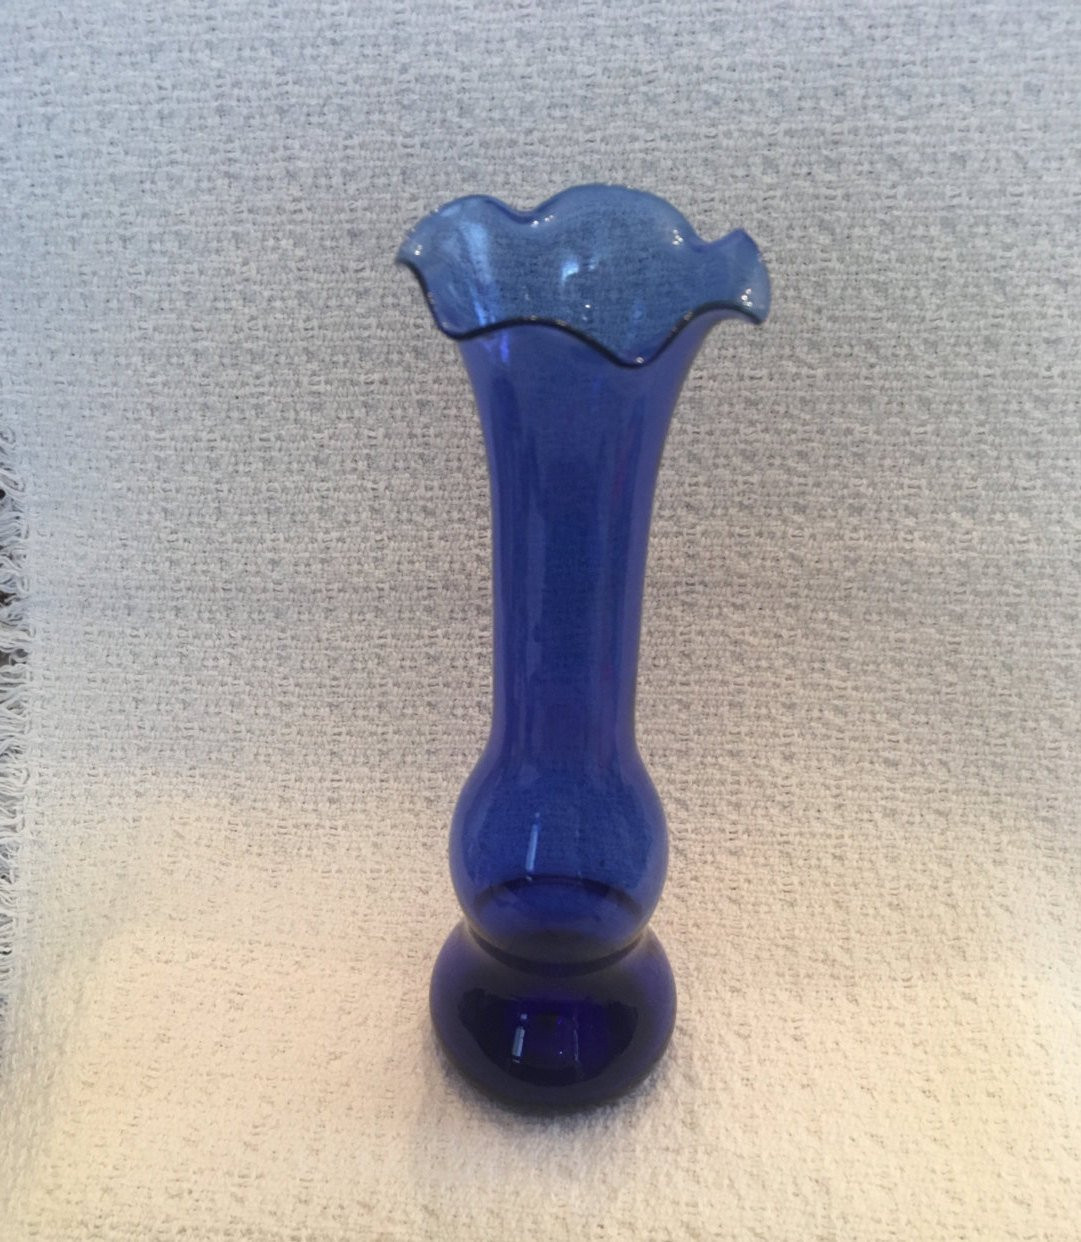 25 Great Hand Blown Glass Bud Vase 2024 free download hand blown glass bud vase of buy cobalt blue glass vase hand blown glass vase blue vase in cobalt blue glass vase hand blown glass vase blue vase ruffled rimmed vase